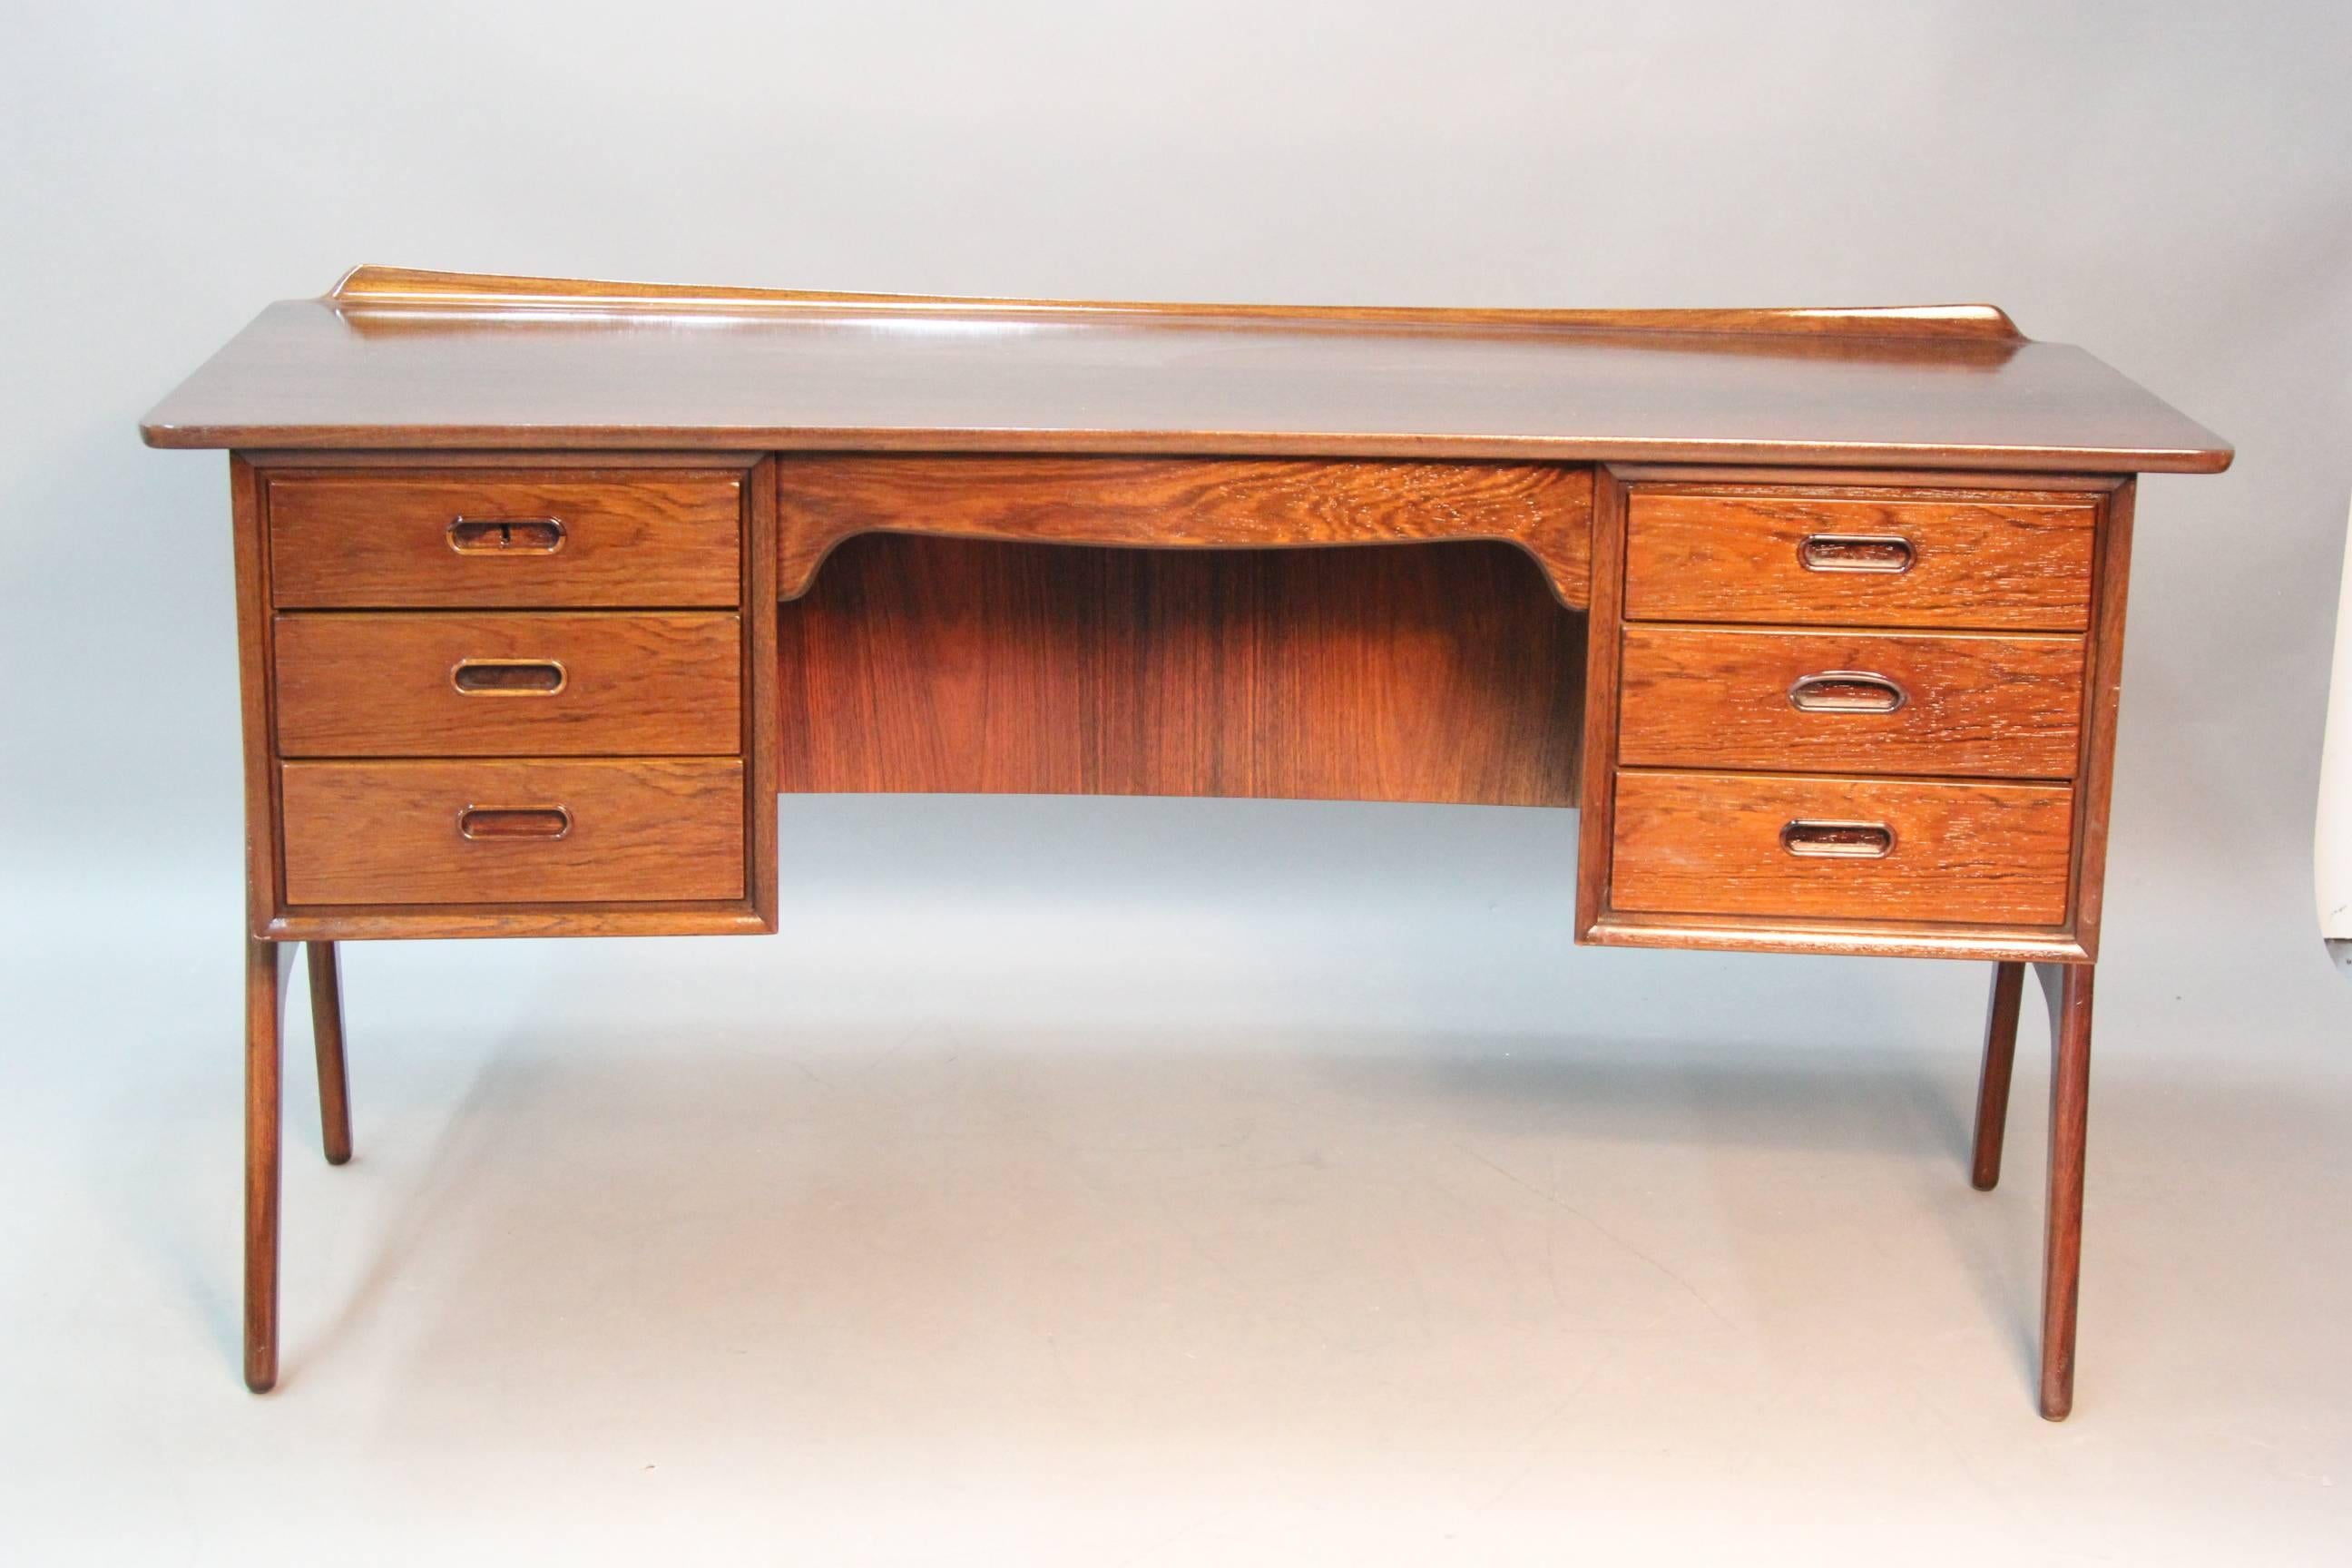 Incredible style and unique shape. This amazing Danish rosewood desk has a front bookshelf or display area, very interesting arched legs and side drawers. Brand newly refinished. With branded mark and paper label. Incredible and rare piece.